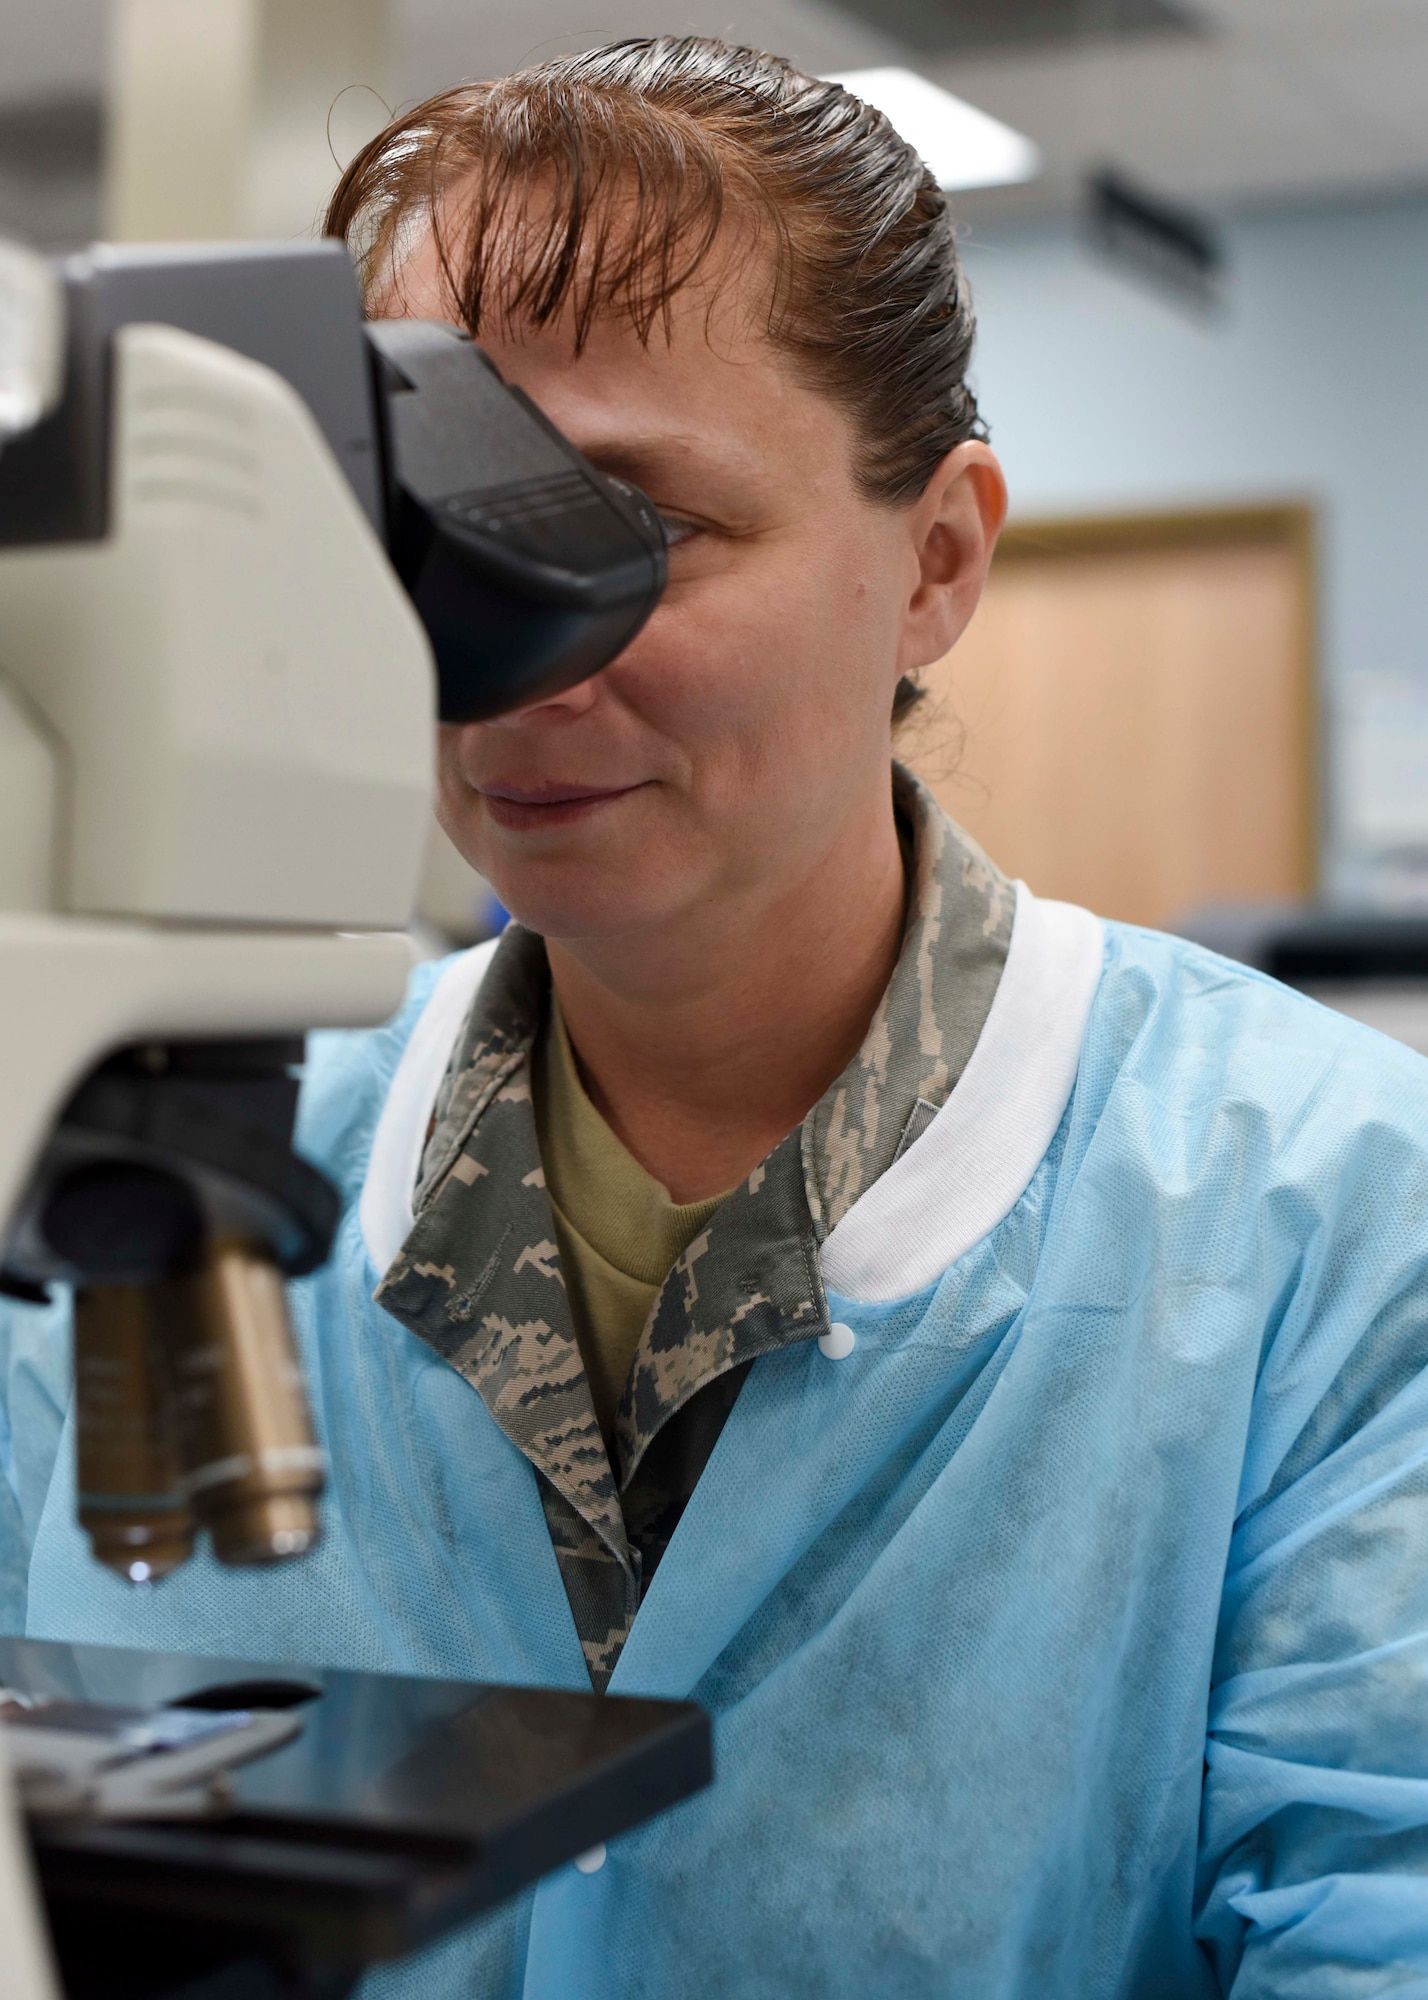 Maj. Rebecca Bird, 49th Medical Group laboratory flight commander, analyzes a blood drop specimen, Jan. 24, 2019, on Holloman Air Force Base, N.M. As a biomedical scientist, Bird is able to test all the chemicals and cells in the body to screen for a variety of diseases and medical conditions, and ensure the body is properly balanced. (U.S. Air Force photo by Staff Sgt. BreeAnn Sachs)